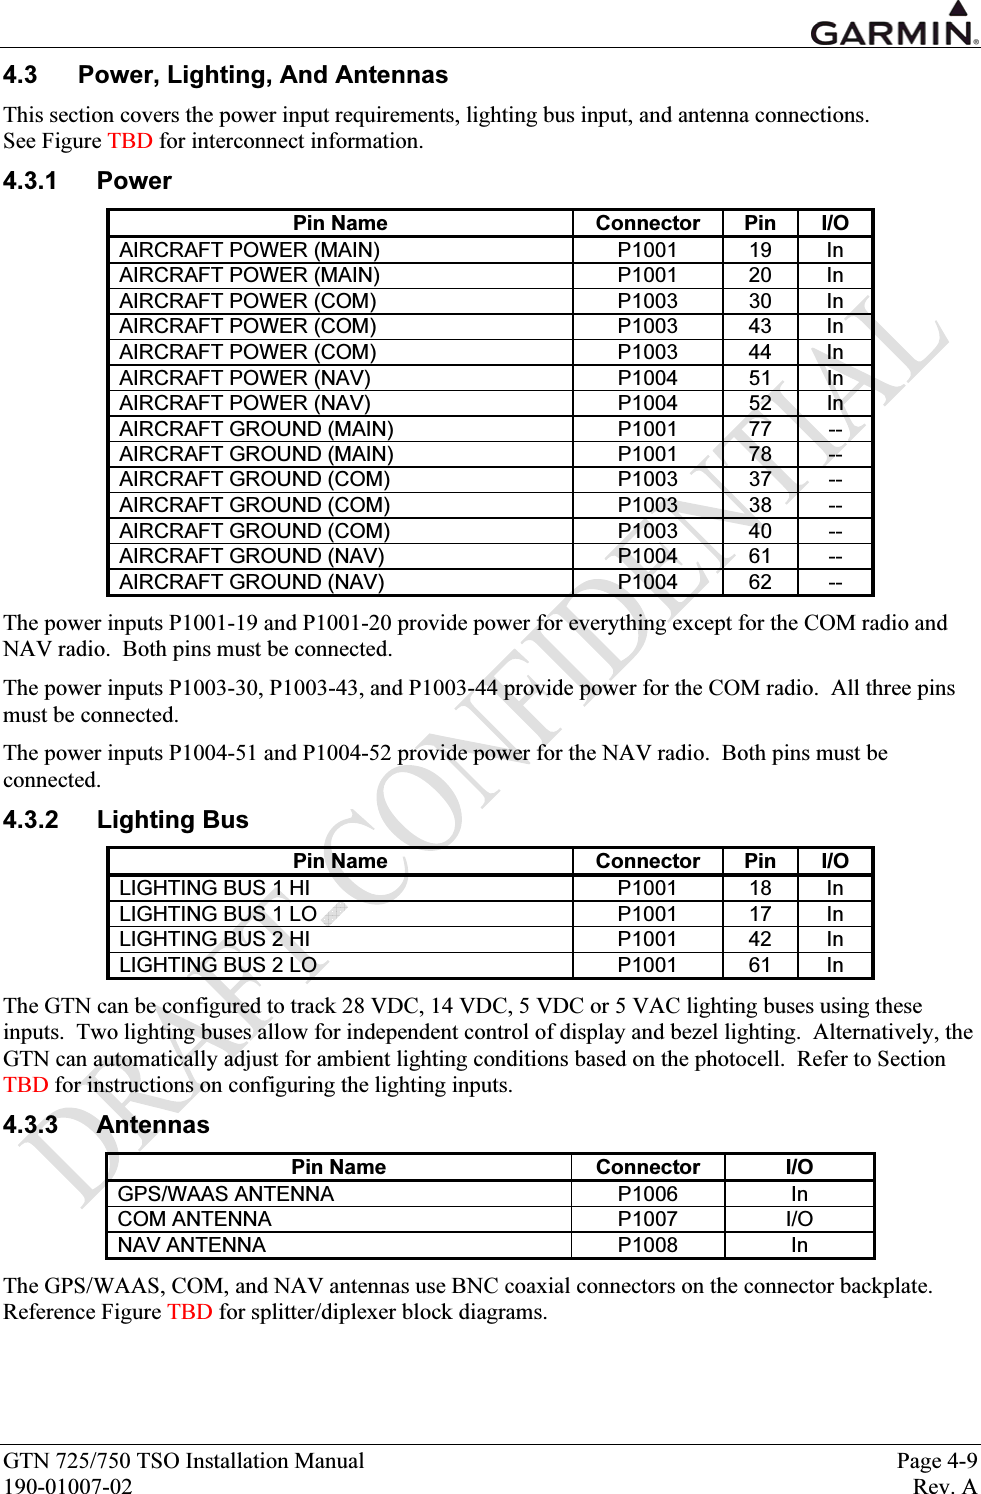  GTN 725/750 TSO Installation Manual  Page 4-9 190-01007-02  Rev. A 4.3  Power, Lighting, And Antennas This section covers the power input requirements, lighting bus input, and antenna connections.   See Figure TBD for interconnect information. 4.3.1 Power Pin Name  Connector  Pin  I/O AIRCRAFT POWER (MAIN)  P1001  19  In AIRCRAFT POWER (MAIN)  P1001  20  In AIRCRAFT POWER (COM)  P1003  30  In AIRCRAFT POWER (COM)  P1003  43  In AIRCRAFT POWER (COM)  P1003  44  In AIRCRAFT POWER (NAV)  P1004  51  In AIRCRAFT POWER (NAV)  P1004  52  In AIRCRAFT GROUND (MAIN)  P1001  77  -- AIRCRAFT GROUND (MAIN)  P1001  78  -- AIRCRAFT GROUND (COM)  P1003  37  -- AIRCRAFT GROUND (COM)  P1003  38  -- AIRCRAFT GROUND (COM)  P1003  40  -- AIRCRAFT GROUND (NAV)  P1004  61  -- AIRCRAFT GROUND (NAV)  P1004  62  -- The power inputs P1001-19 and P1001-20 provide power for everything except for the COM radio and NAV radio.  Both pins must be connected. The power inputs P1003-30, P1003-43, and P1003-44 provide power for the COM radio.  All three pins must be connected. The power inputs P1004-51 and P1004-52 provide power for the NAV radio.  Both pins must be connected. 4.3.2 Lighting Bus Pin Name  Connector  Pin  I/O LIGHTING BUS 1 HI  P1001  18  In LIGHTING BUS 1 LO  P1001  17  In LIGHTING BUS 2 HI  P1001  42  In LIGHTING BUS 2 LO  P1001  61  In The GTN can be configured to track 28 VDC, 14 VDC, 5 VDC or 5 VAC lighting buses using these inputs.  Two lighting buses allow for independent control of display and bezel lighting.  Alternatively, the GTN can automatically adjust for ambient lighting conditions based on the photocell.  Refer to Section TBD for instructions on configuring the lighting inputs. 4.3.3 Antennas Pin Name  Connector  I/O GPS/WAAS ANTENNA  P1006  In COM ANTENNA  P1007  I/O NAV ANTENNA  P1008  In The GPS/WAAS, COM, and NAV antennas use BNC coaxial connectors on the connector backplate.  Reference Figure TBD for splitter/diplexer block diagrams. 